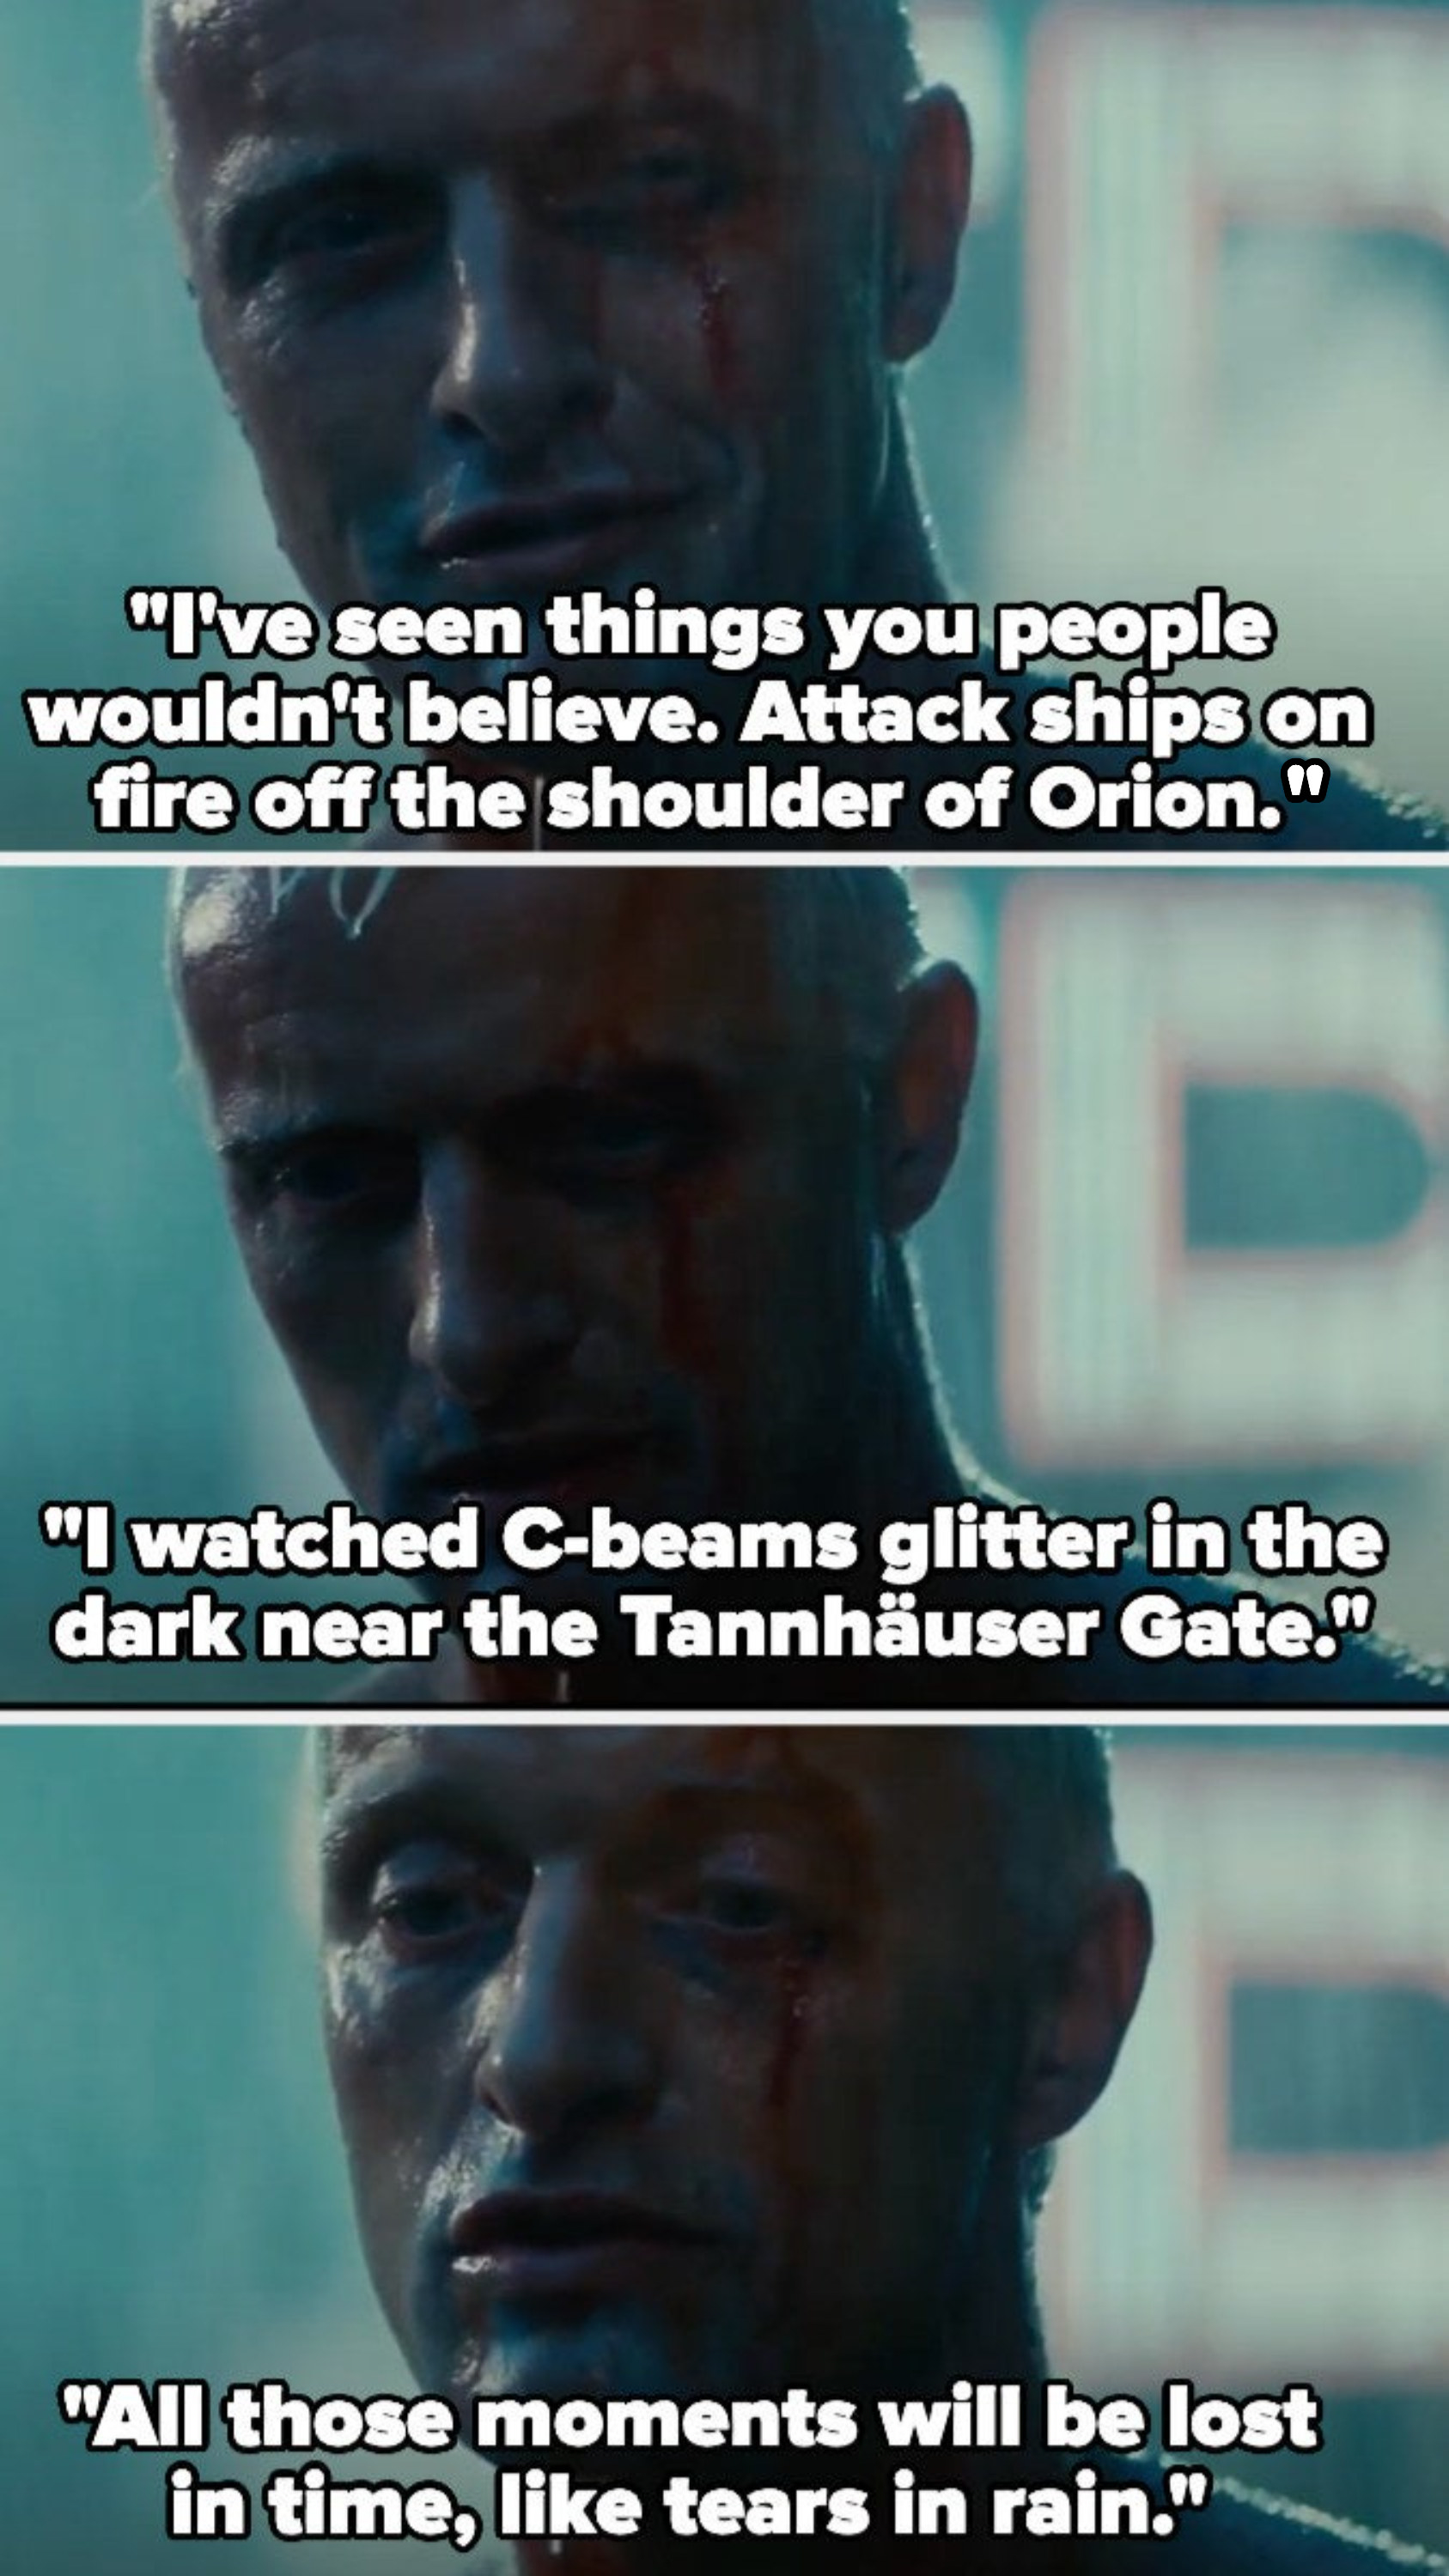 Roy Batty says, &quot;I&#x27;ve seen things you people wouldn&#x27;t believe. Attack ships on fire off the shoulder of Orion. I watched C-beams glitter in the dark near the Tannhauser Gate. All those moments will be lost in time, like tears in rain&quot;